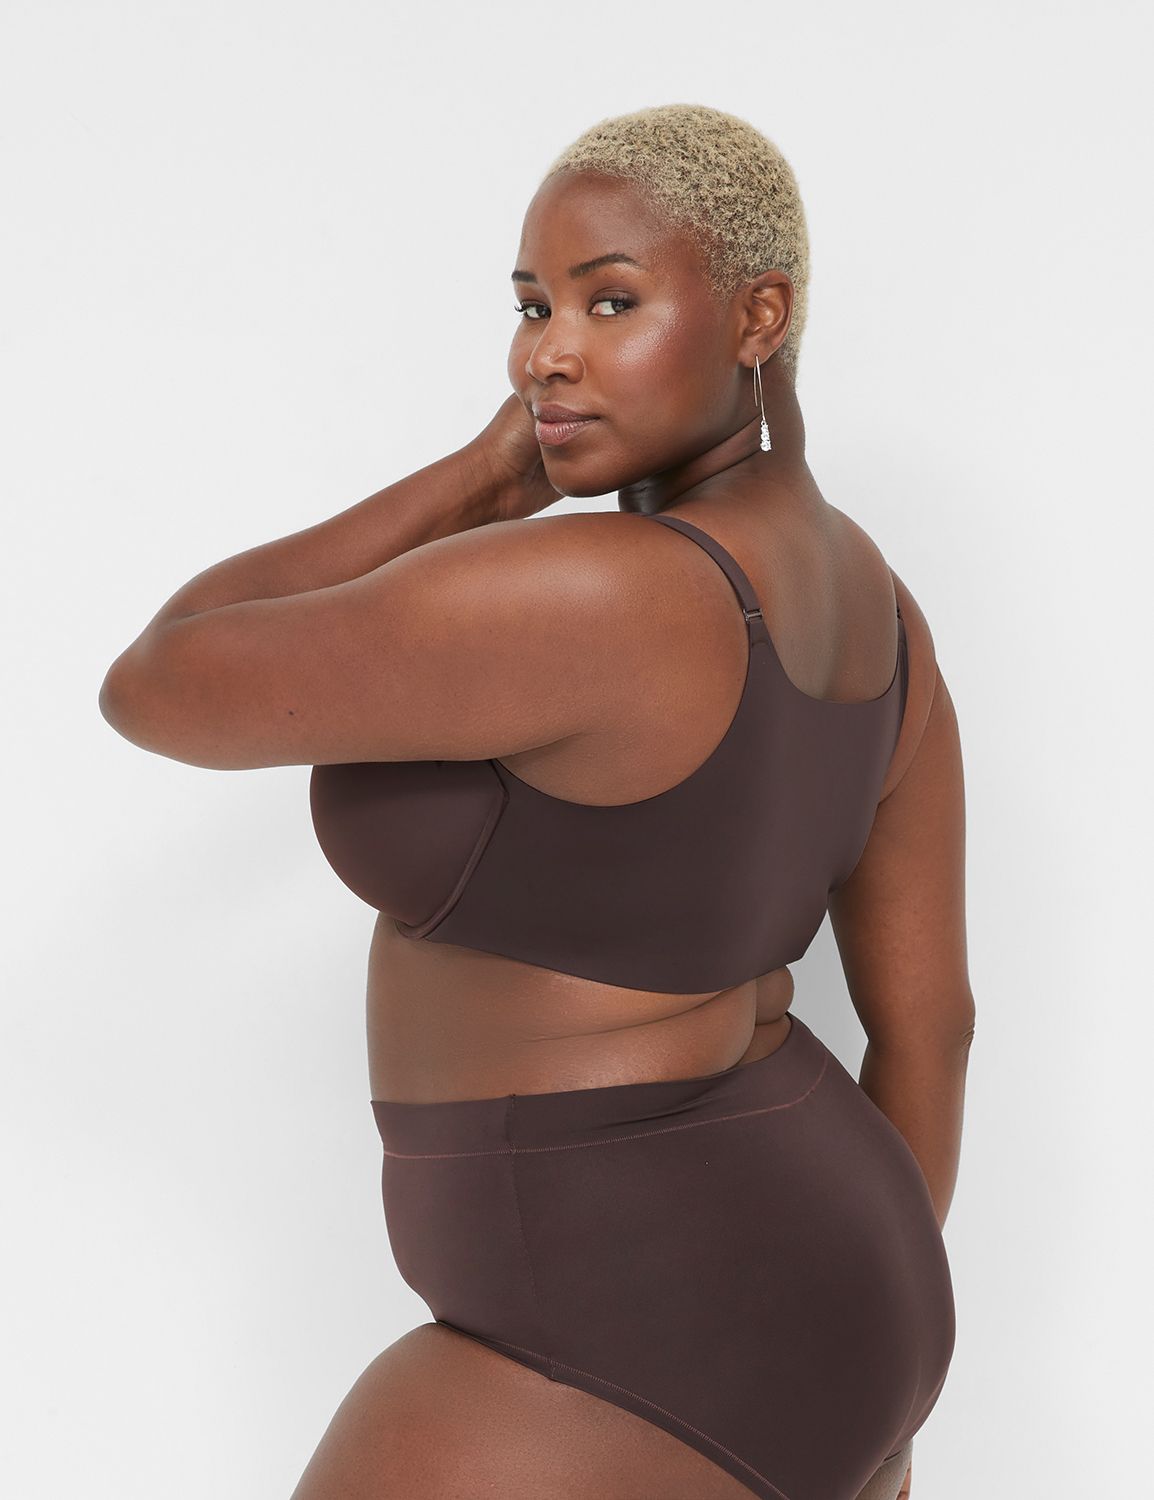 Lane Bryant: Buy 2 Cacique Bras Get 2 FREE (+ Additional 25% OFF